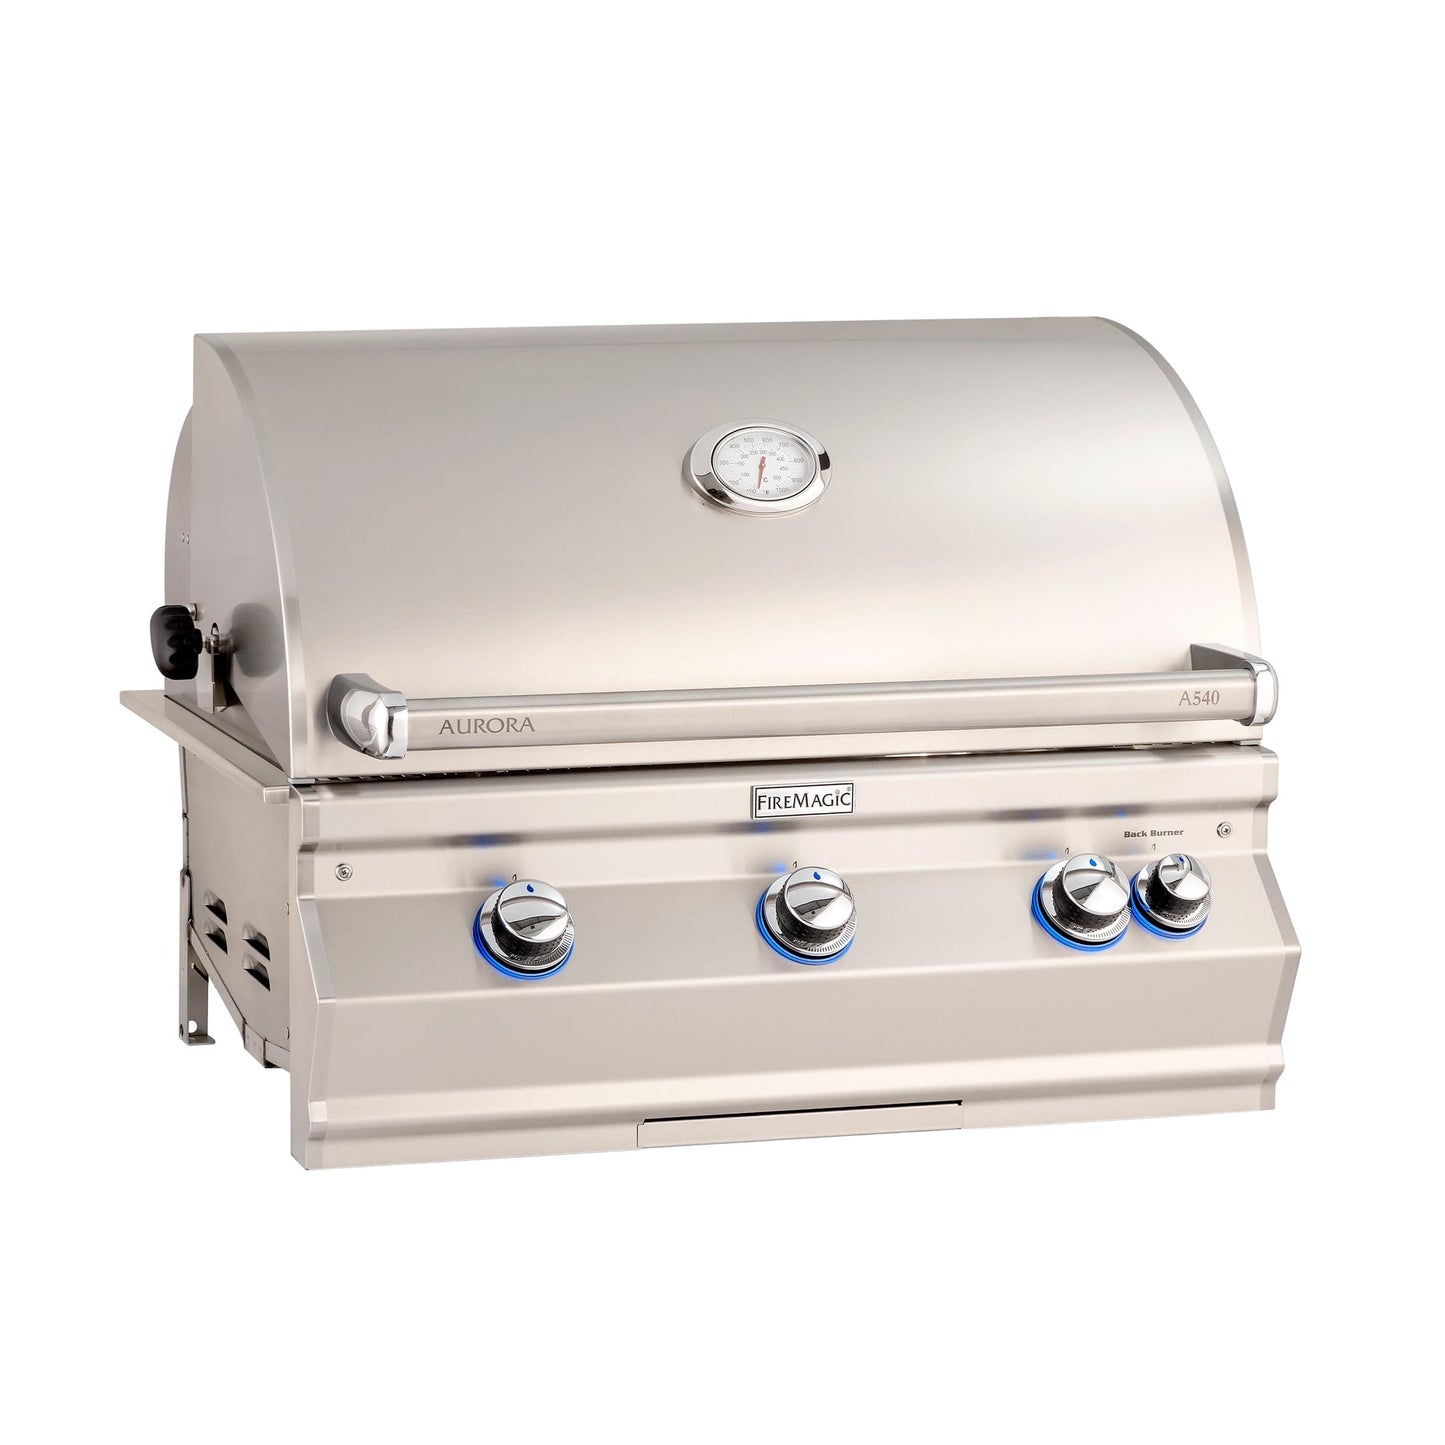 Fire Magic Built-In Grill Fire Magic - Aurora A540i Built-In Grill With Analog Thermometer With Rotisserie Back Burner - Natural Gas / Liquid Propane